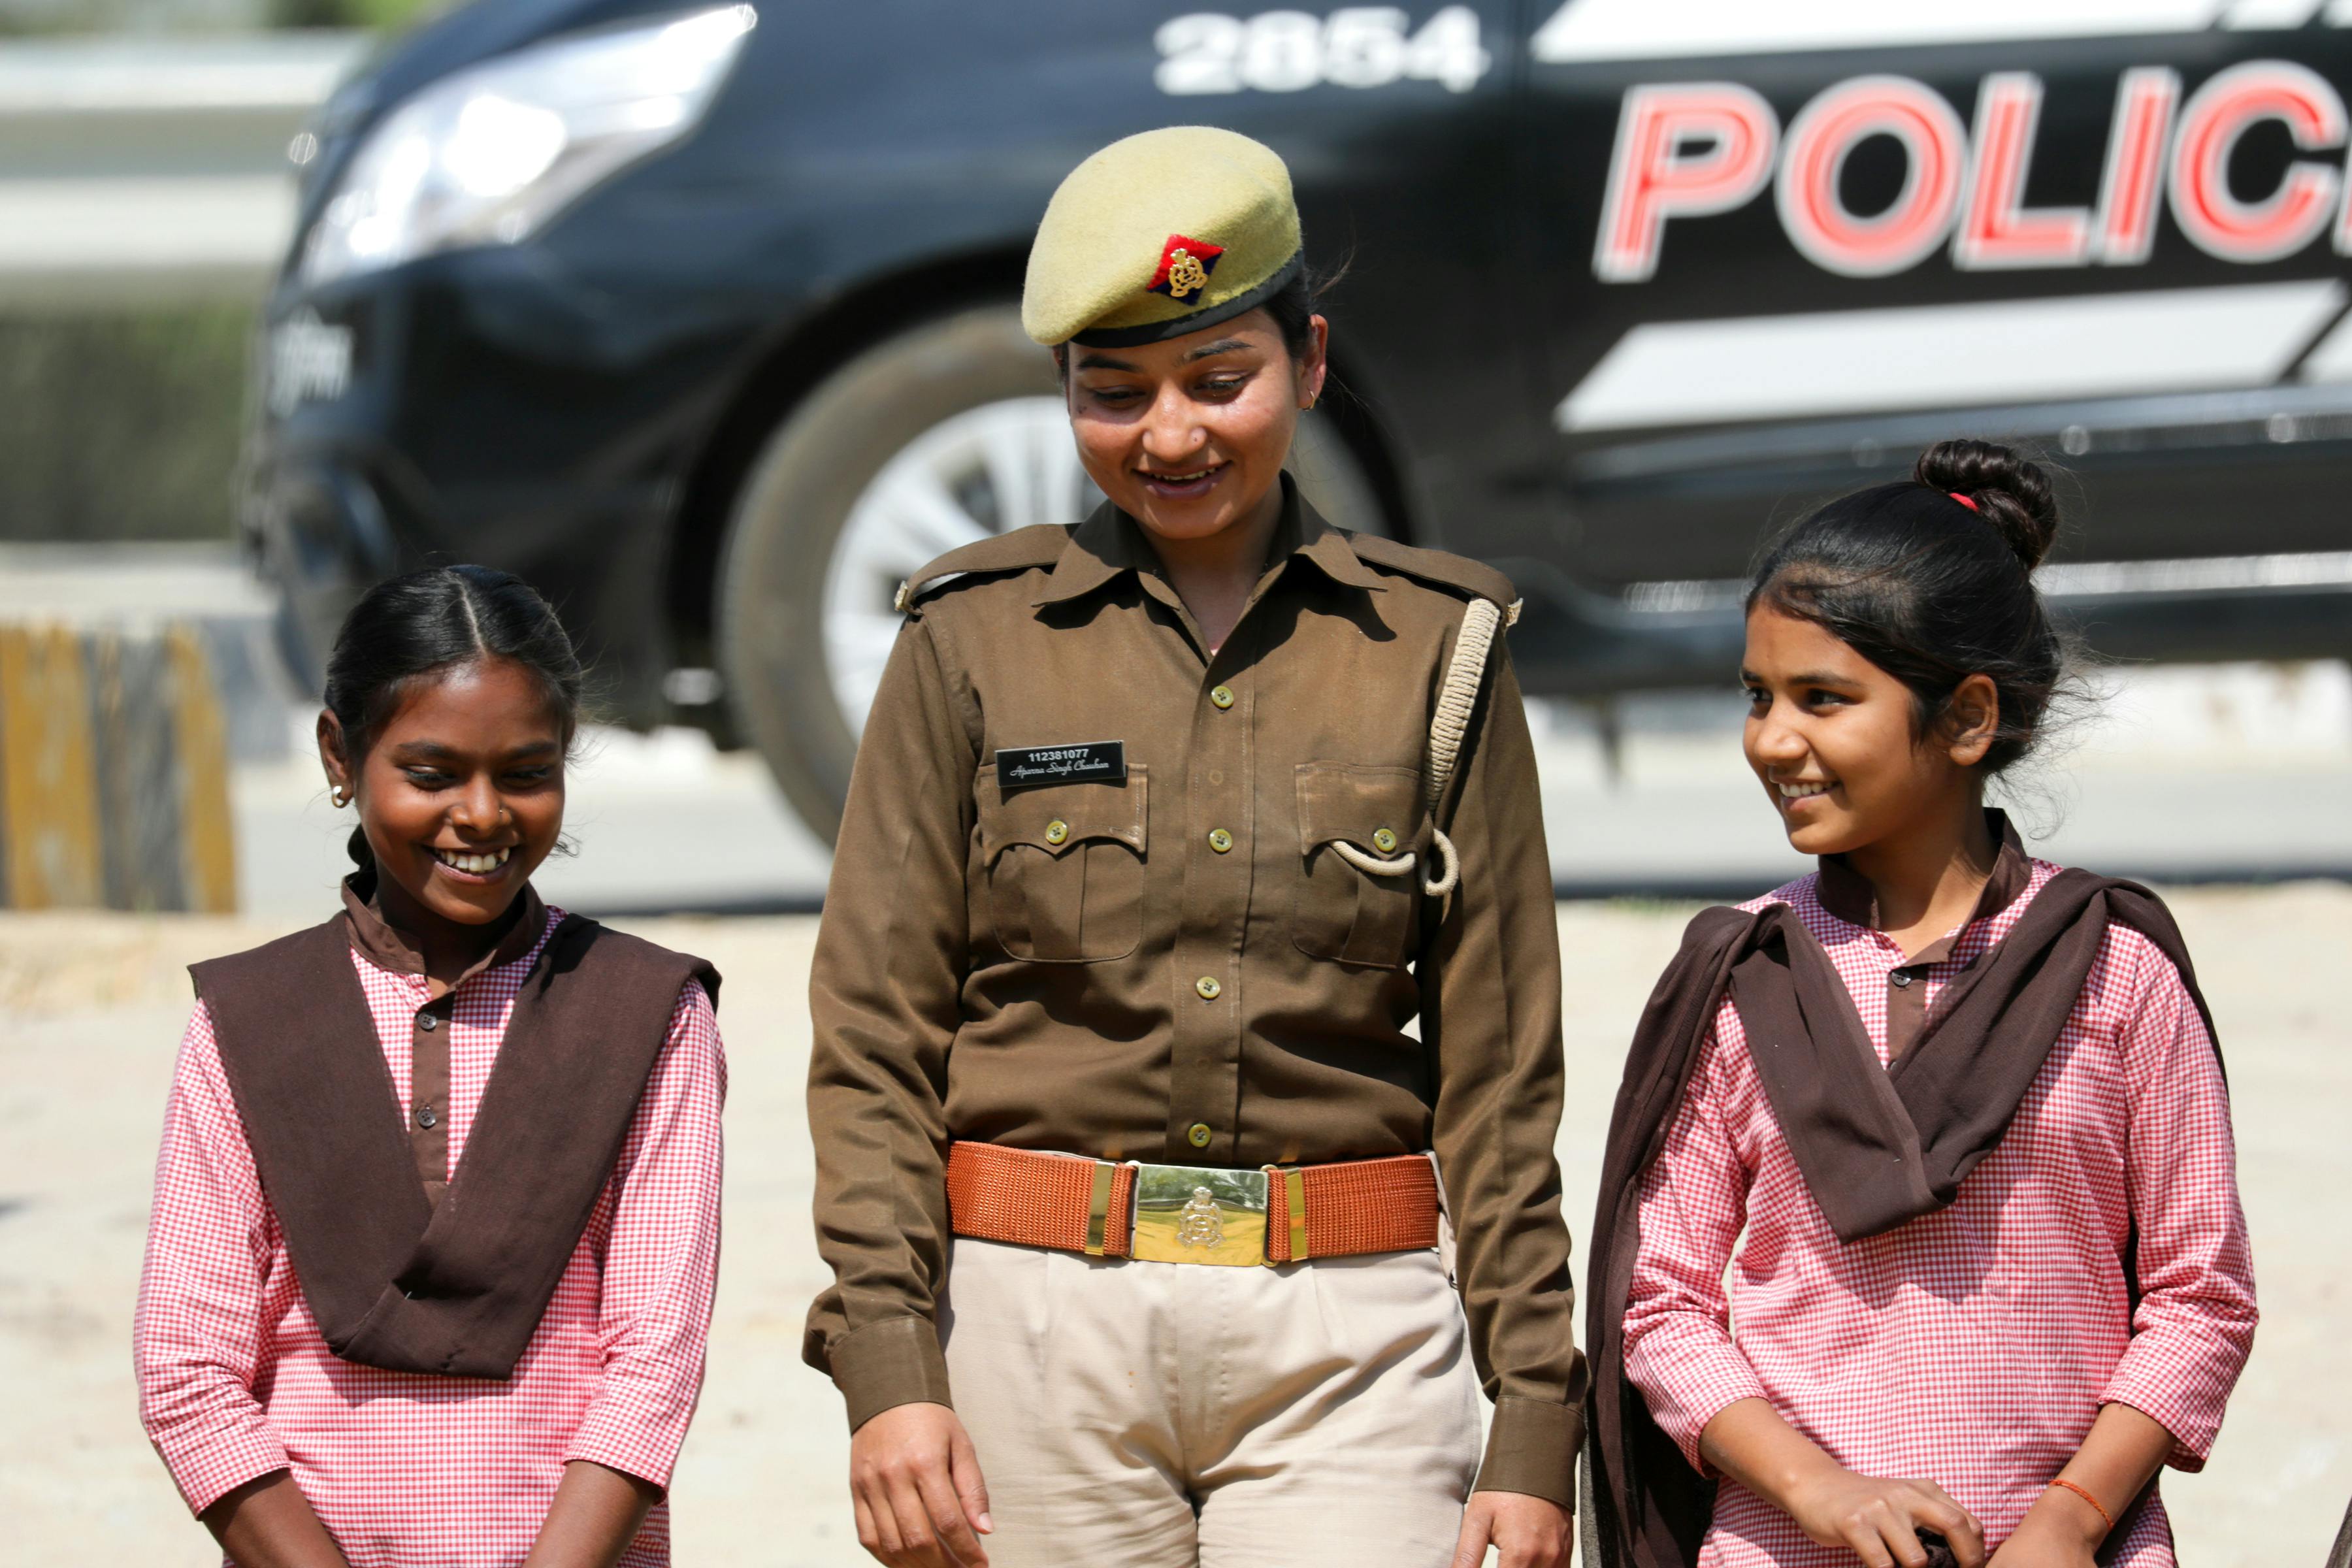 Buy MODERNAZ Police dress for kids | Community Worker Dress, Ips Officer  Uniform Fancy Dress (7-8 Years) Online at Low Prices in India - Amazon.in